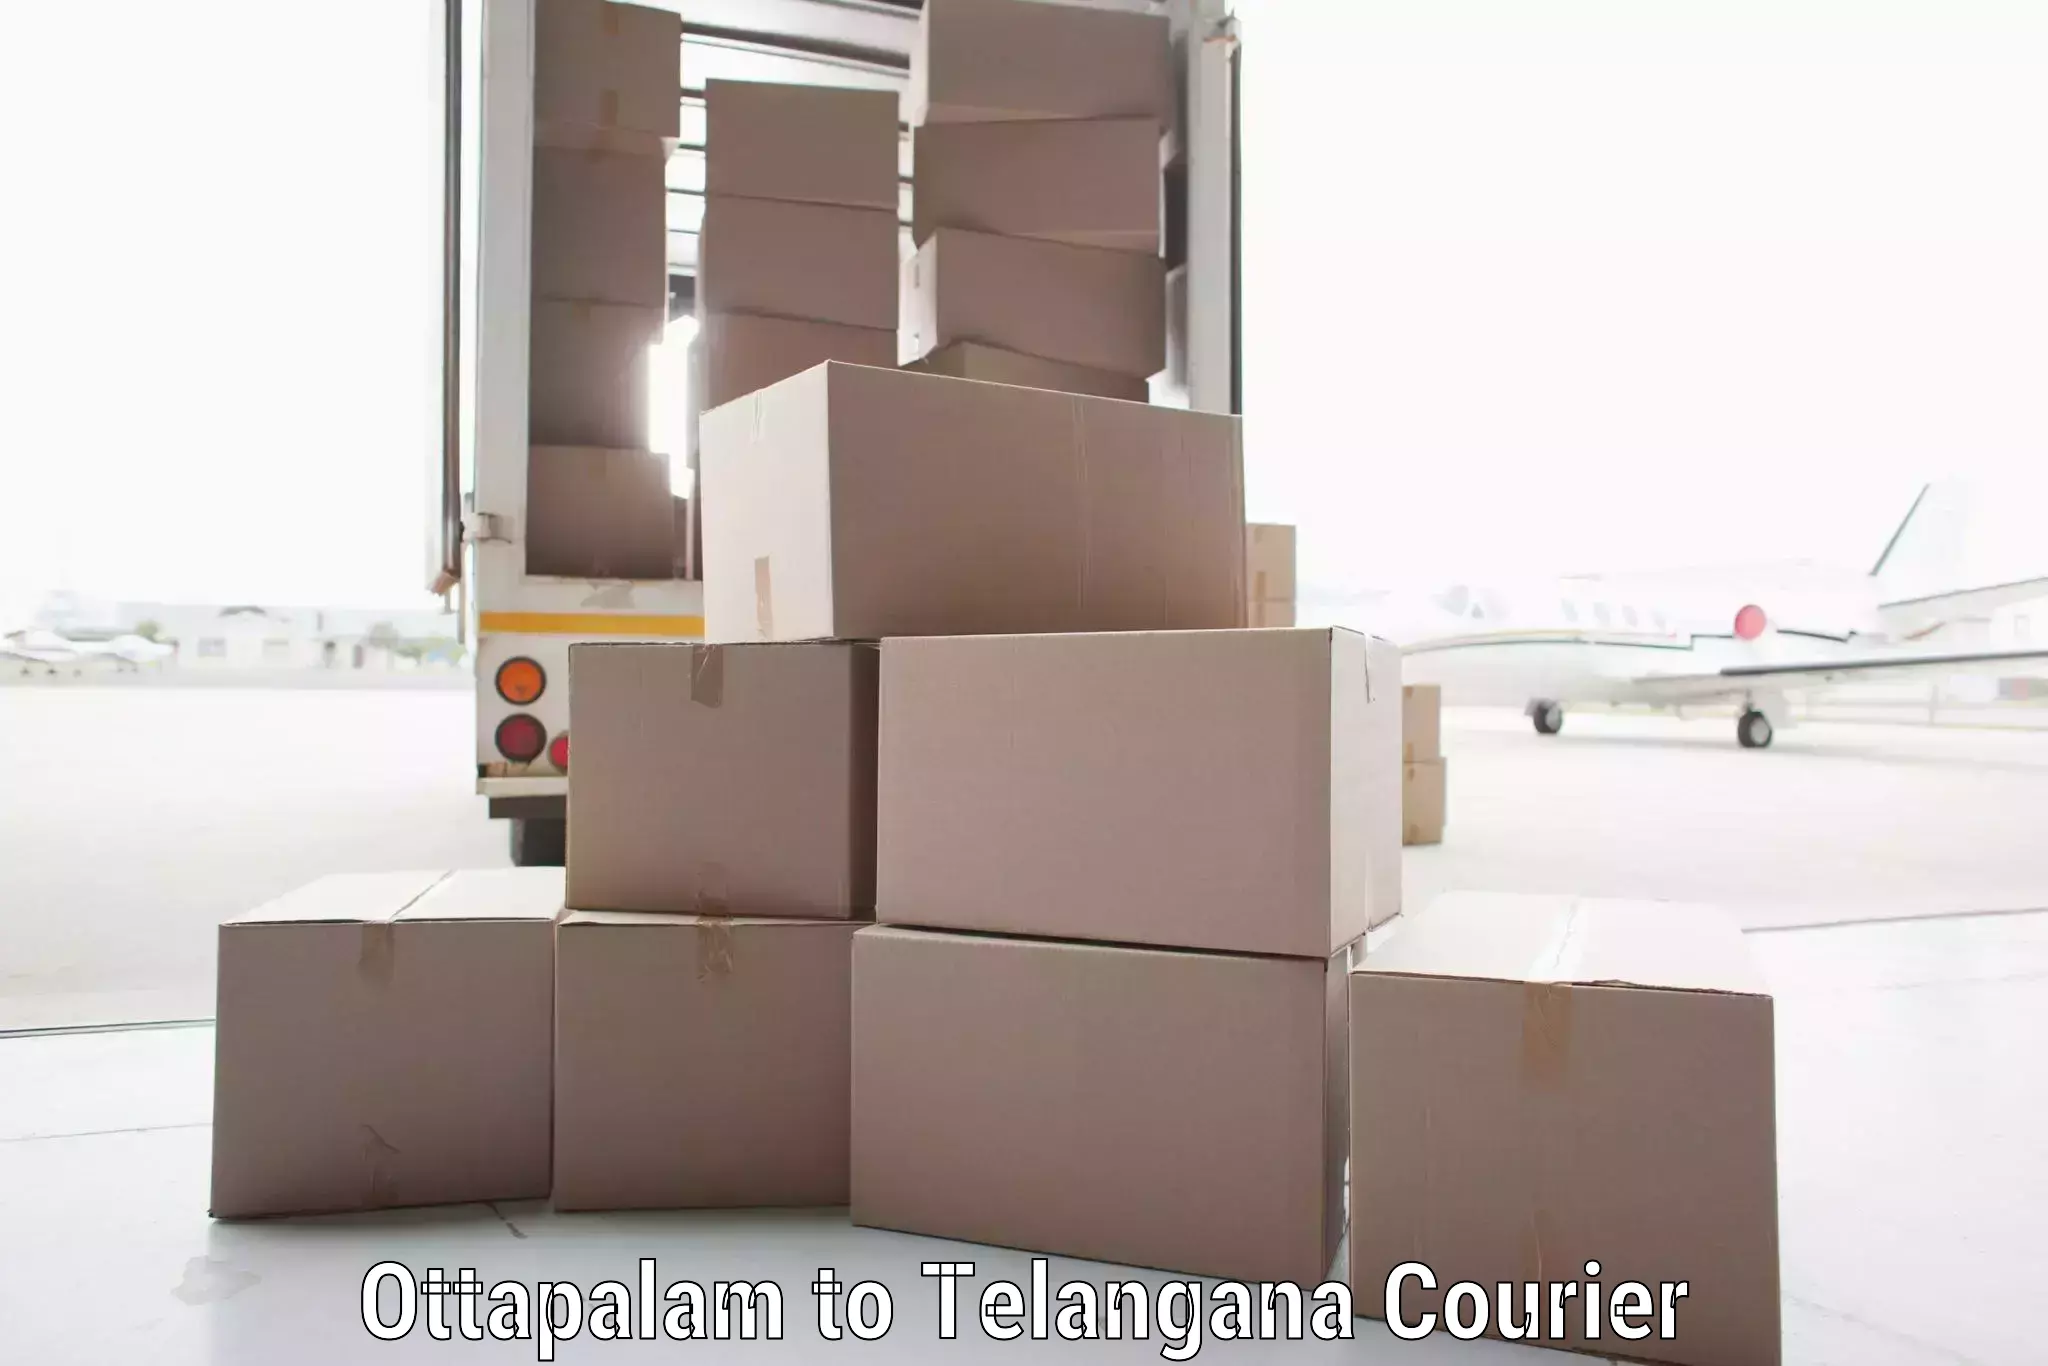 State-of-the-art courier technology Ottapalam to Netrang